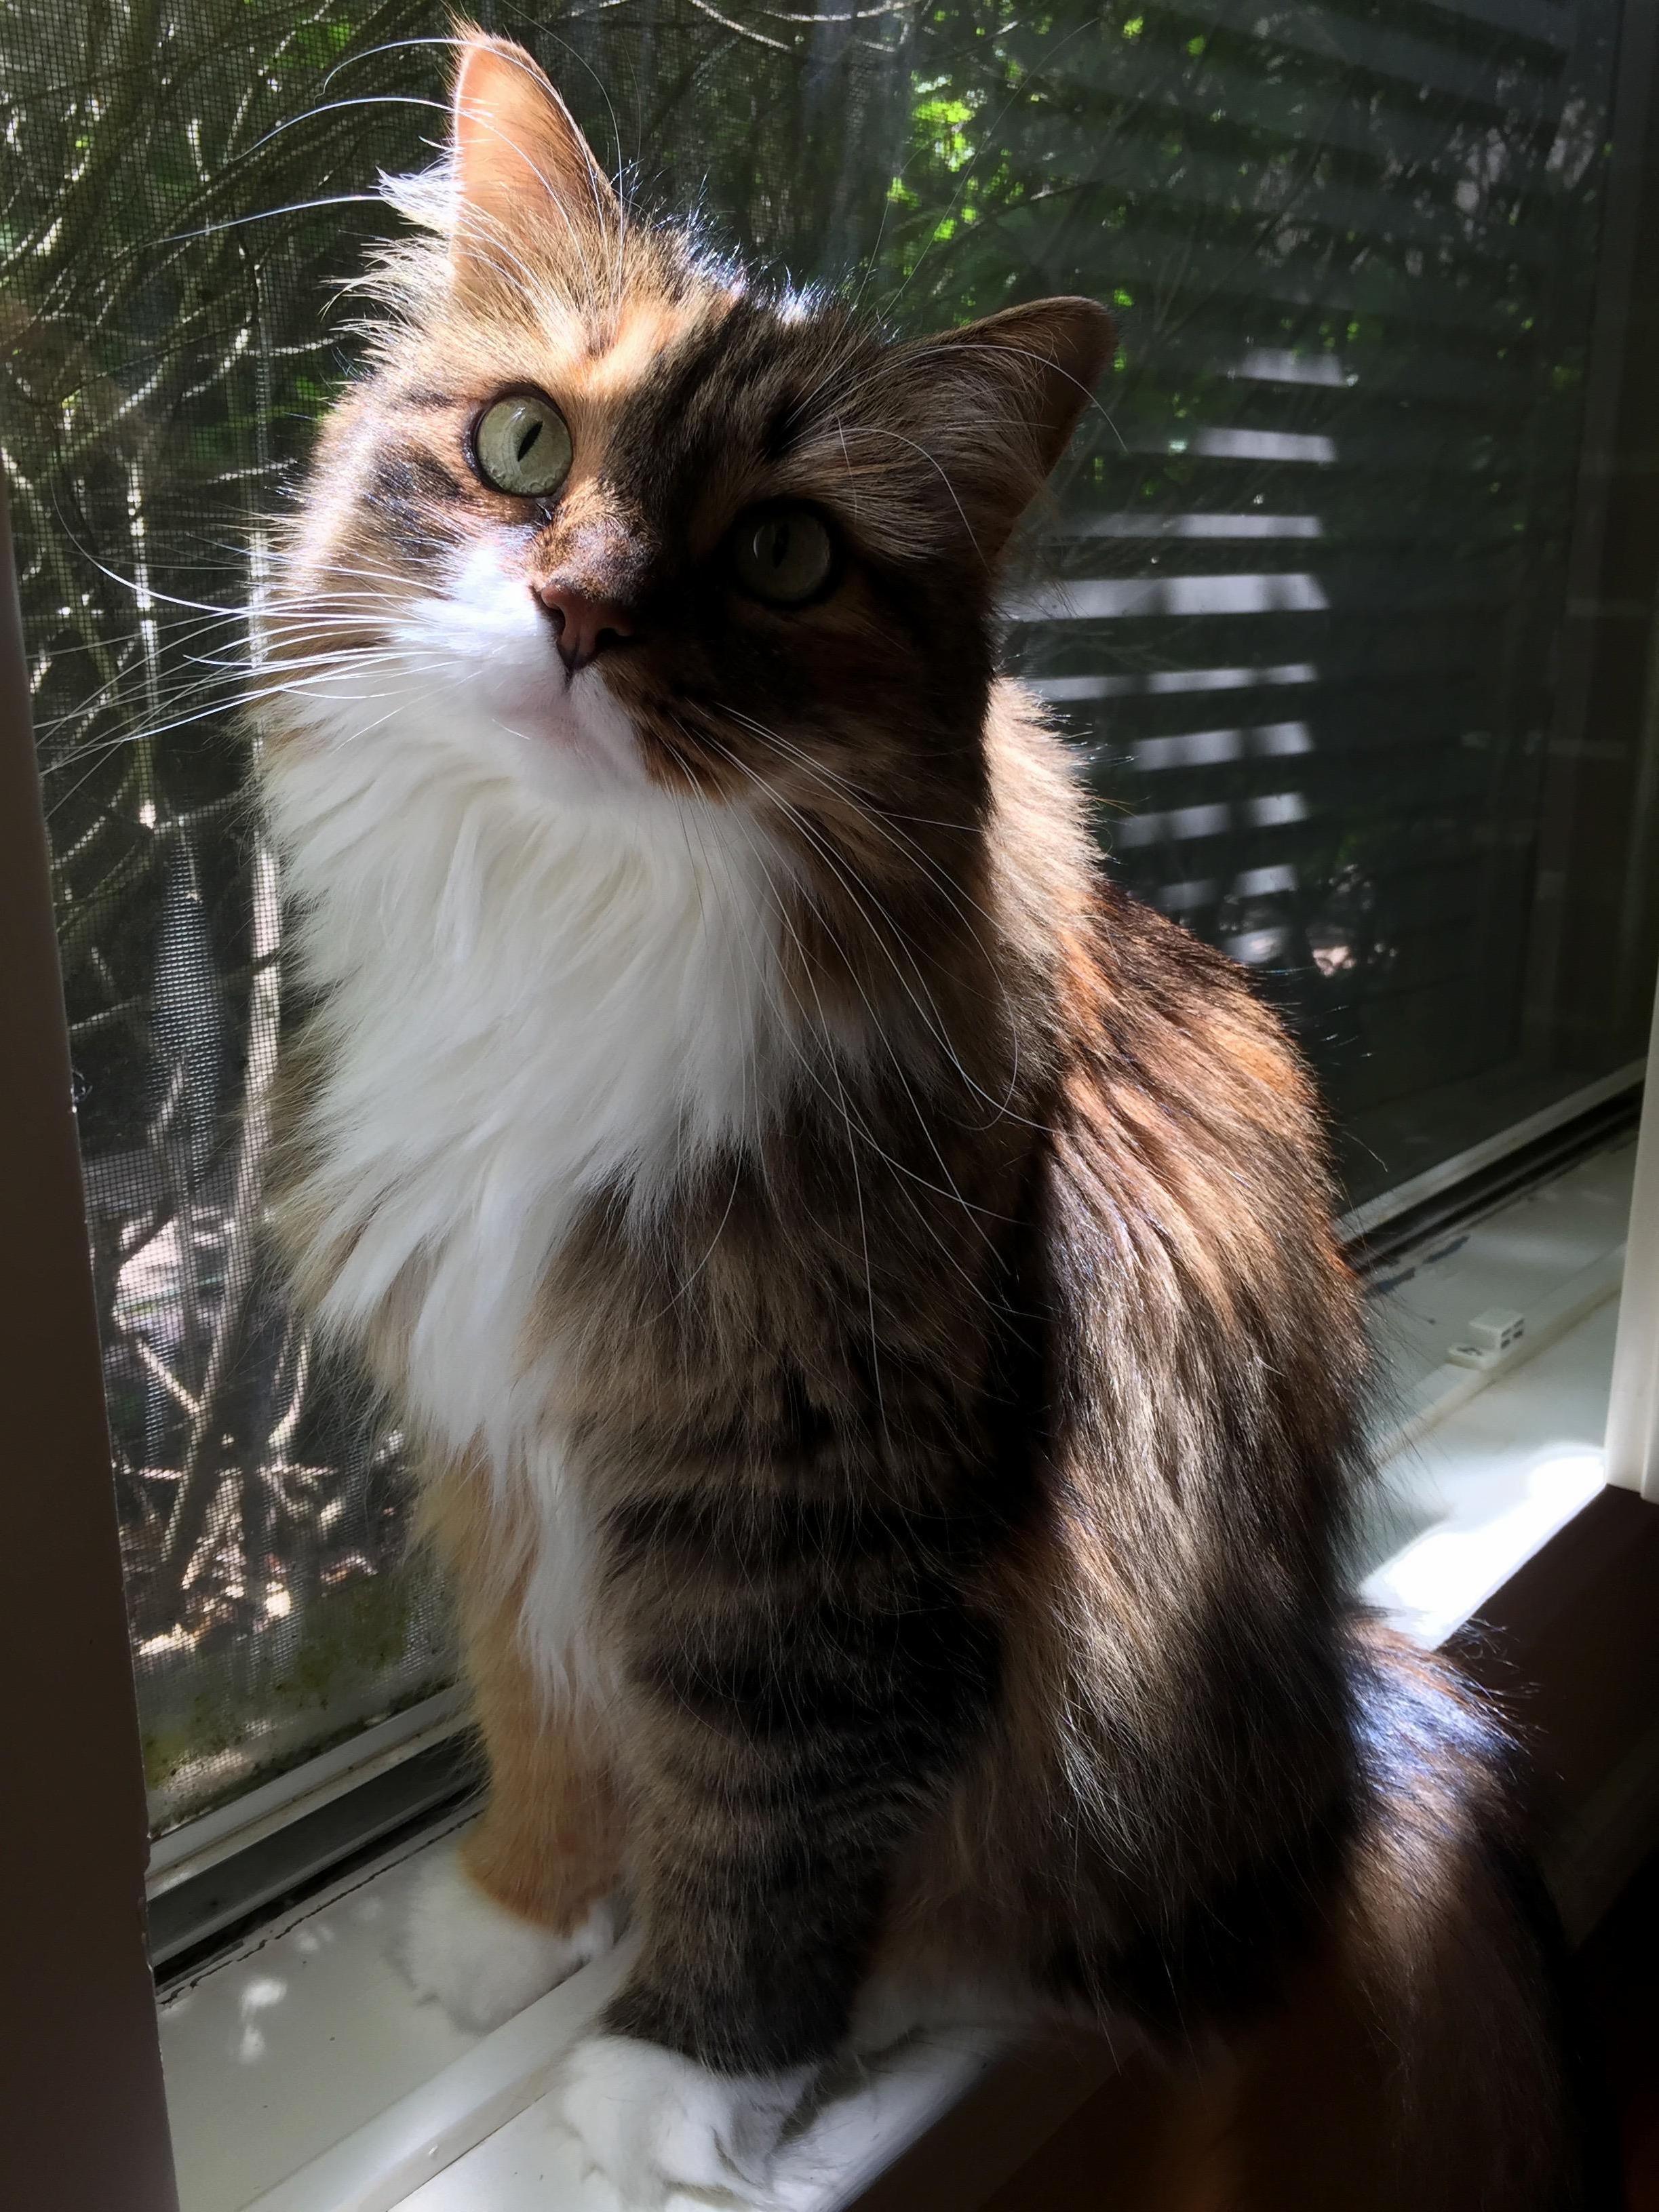 My girl stella catching some rays in the window